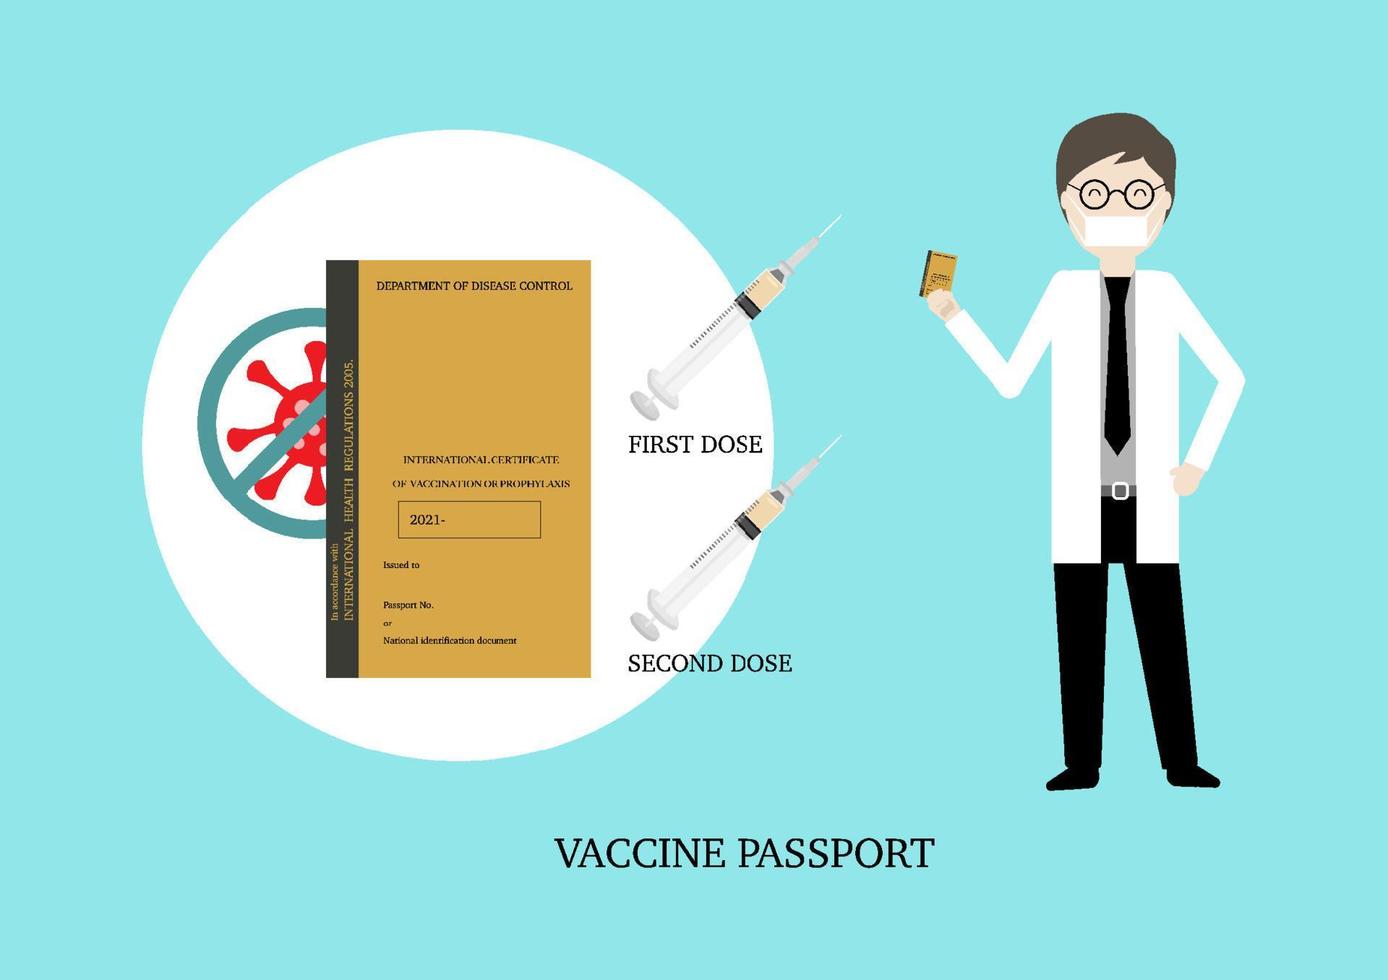 Vaccine passport for travel after two doses of covid-19 vaccination vector